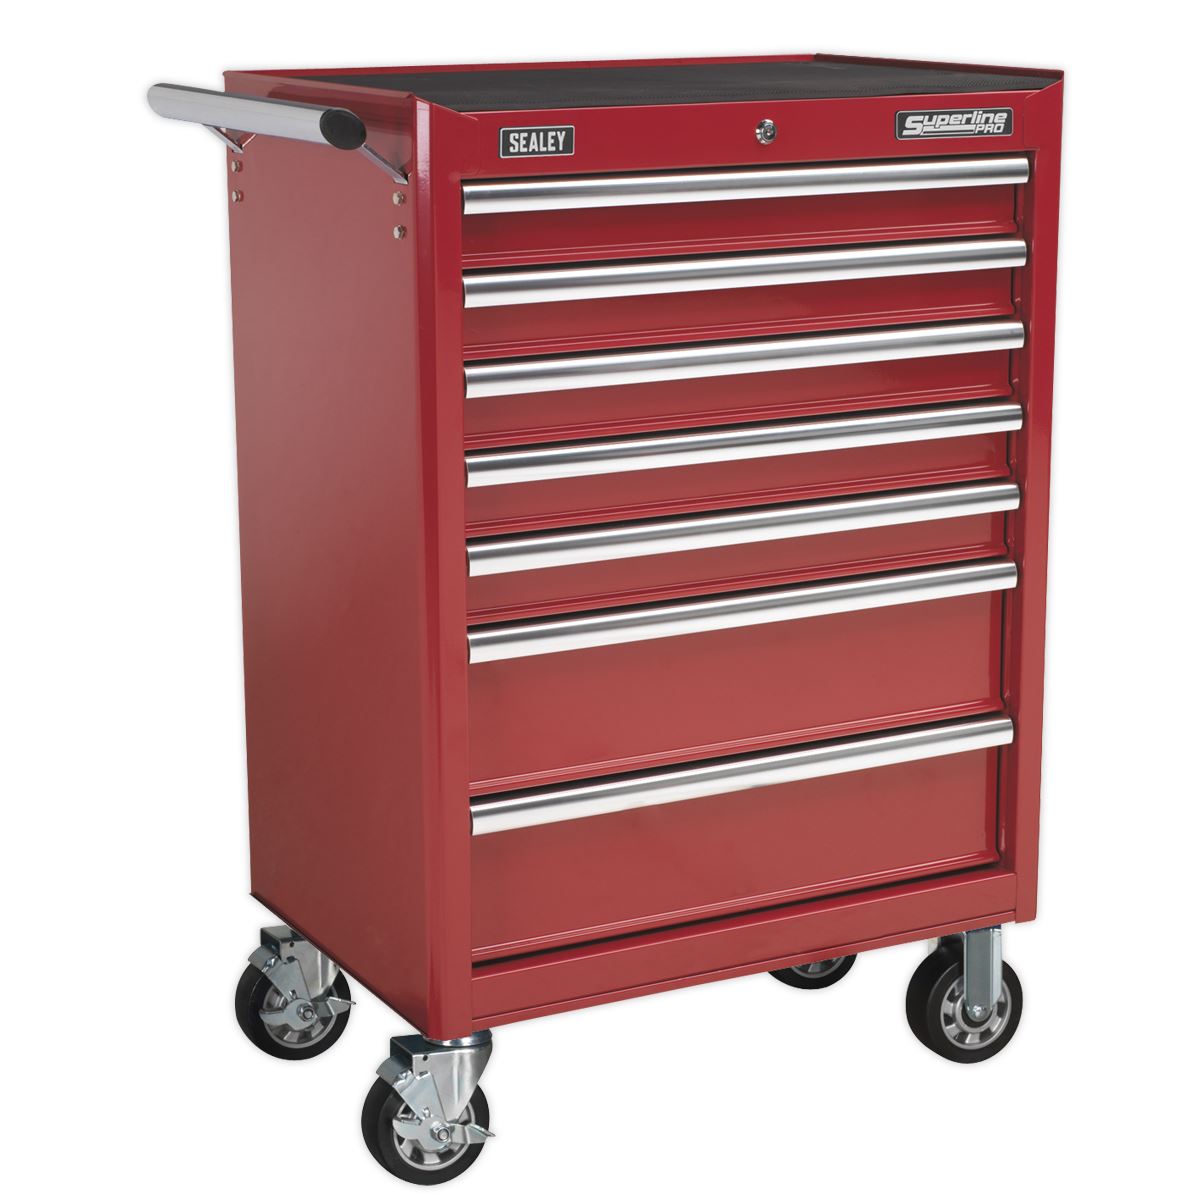 Sealey Superline Pro Rollcab 7 Drawer with Ball-Bearing Slides - Red